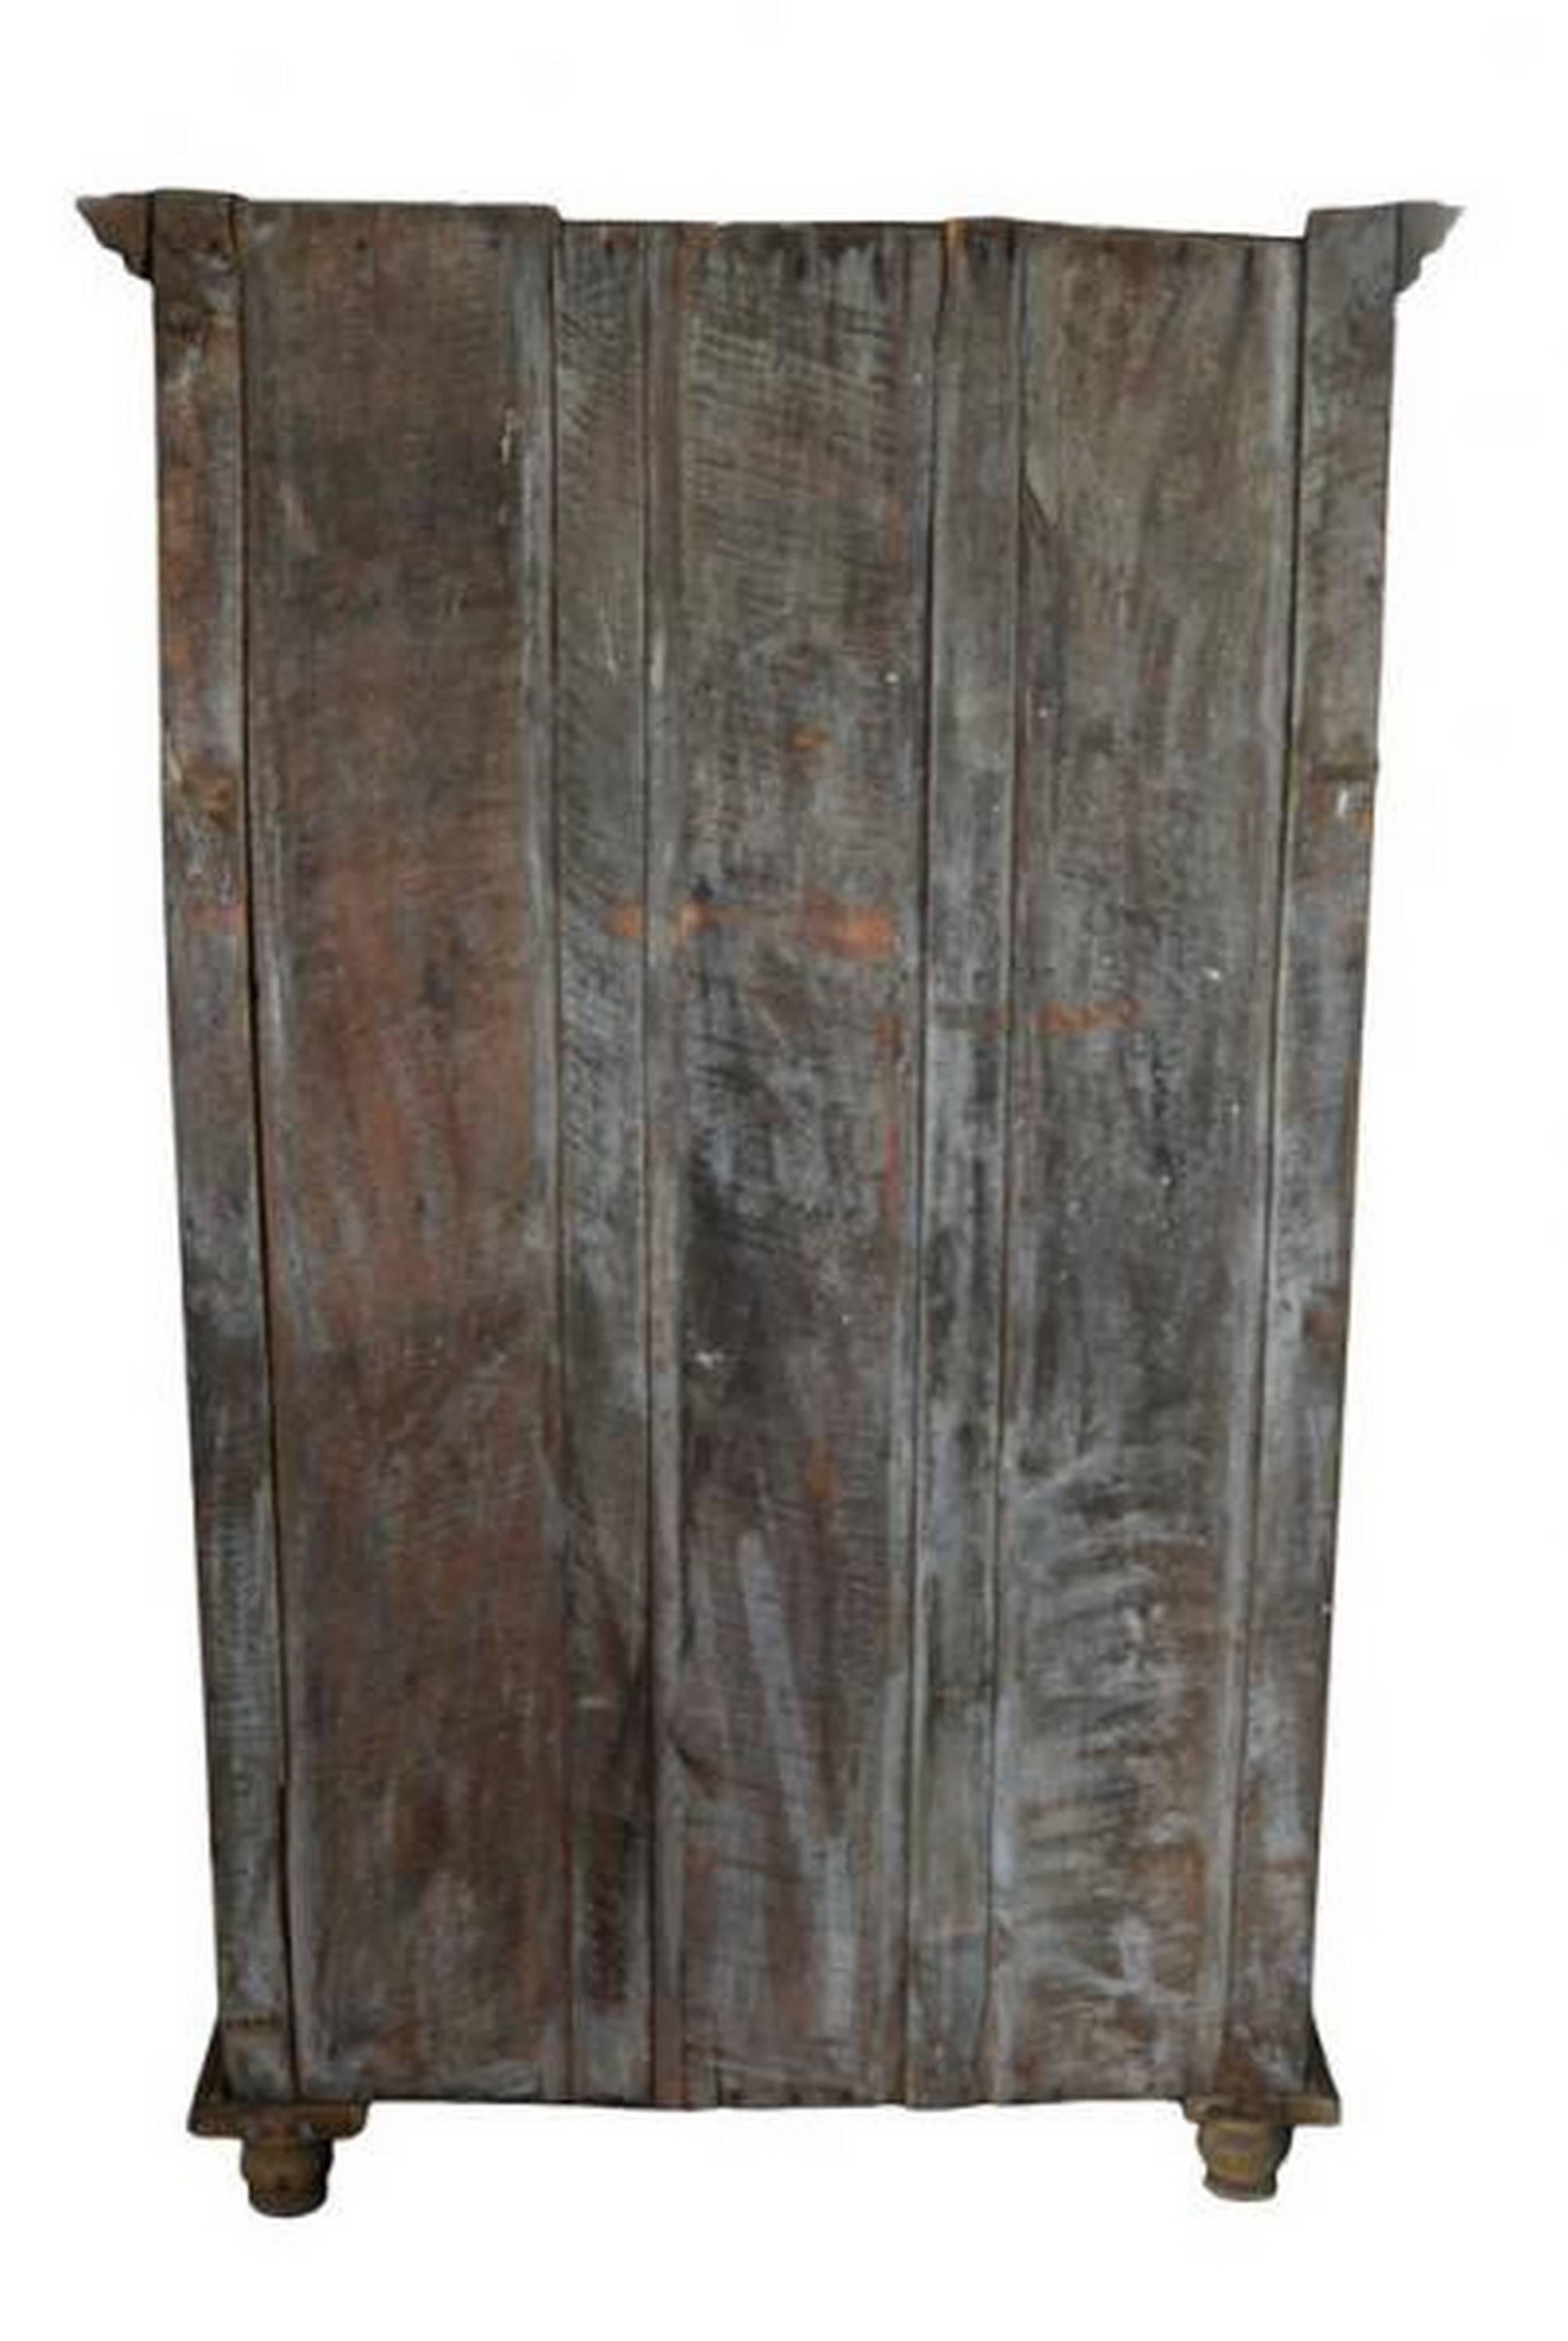 Hand-Carved Rustic Indian Wood Cabinet with Five Hand Carved Doors, Mid-19th Century